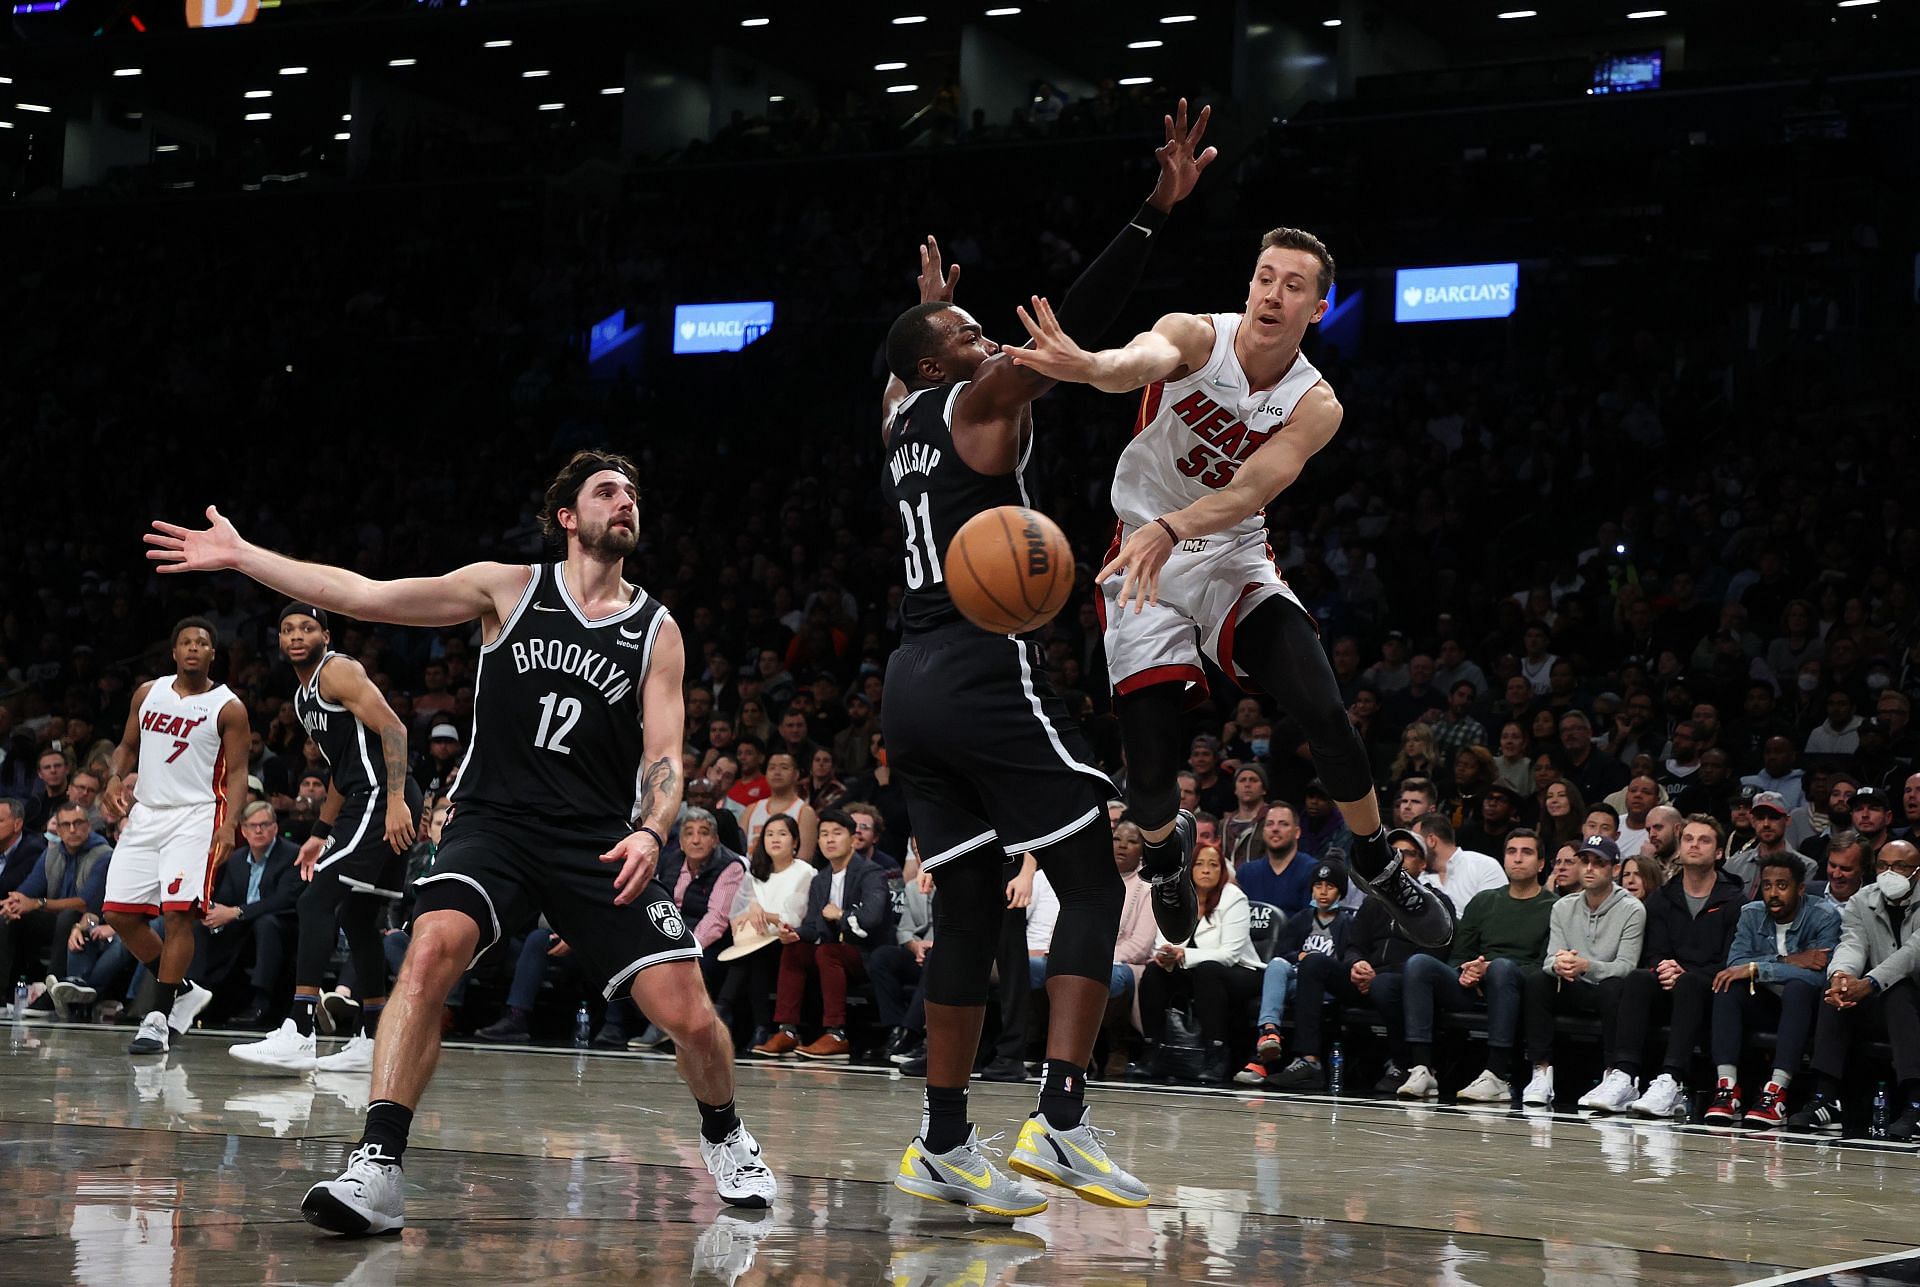 Action from the Miami Heat v Brooklyn Nets game